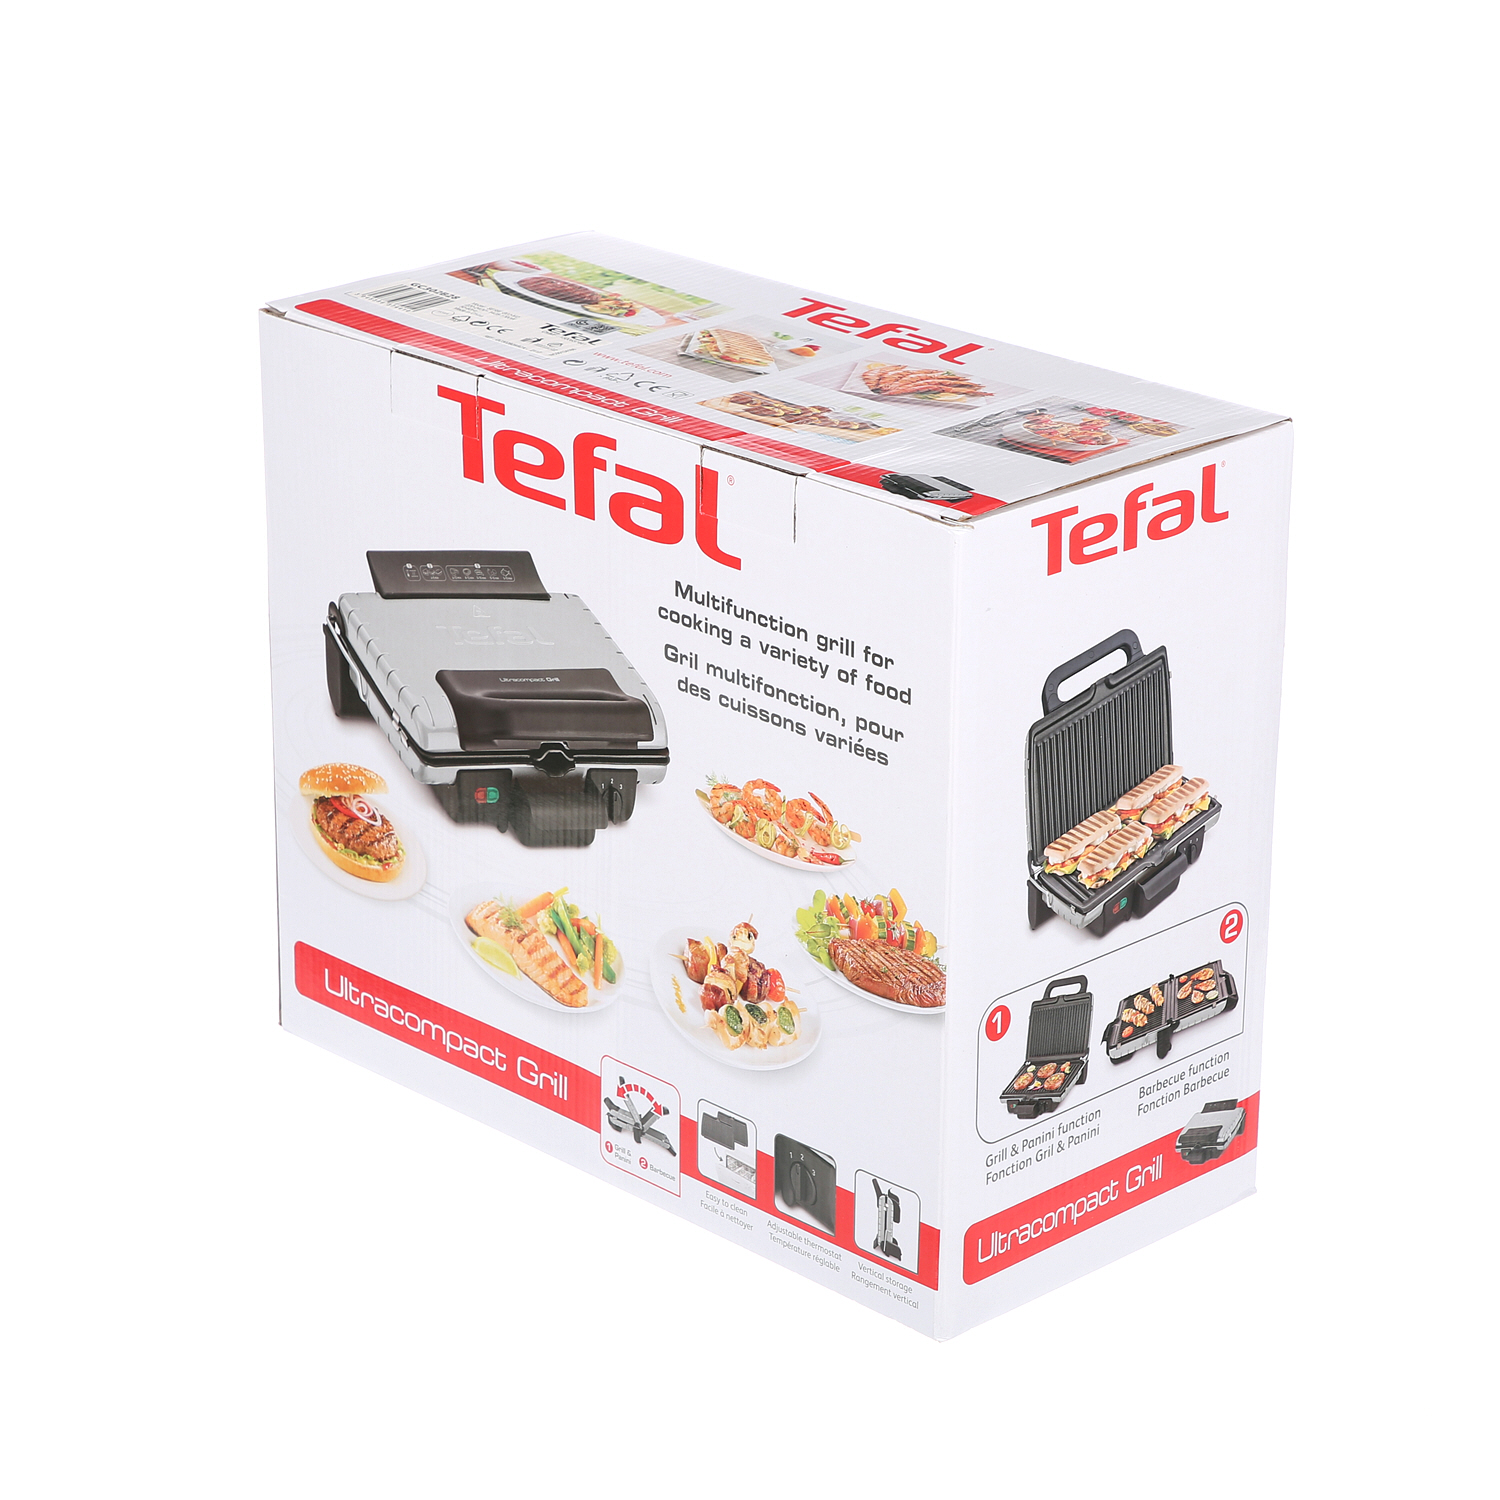 Tefal BBQ Grill Compact 600